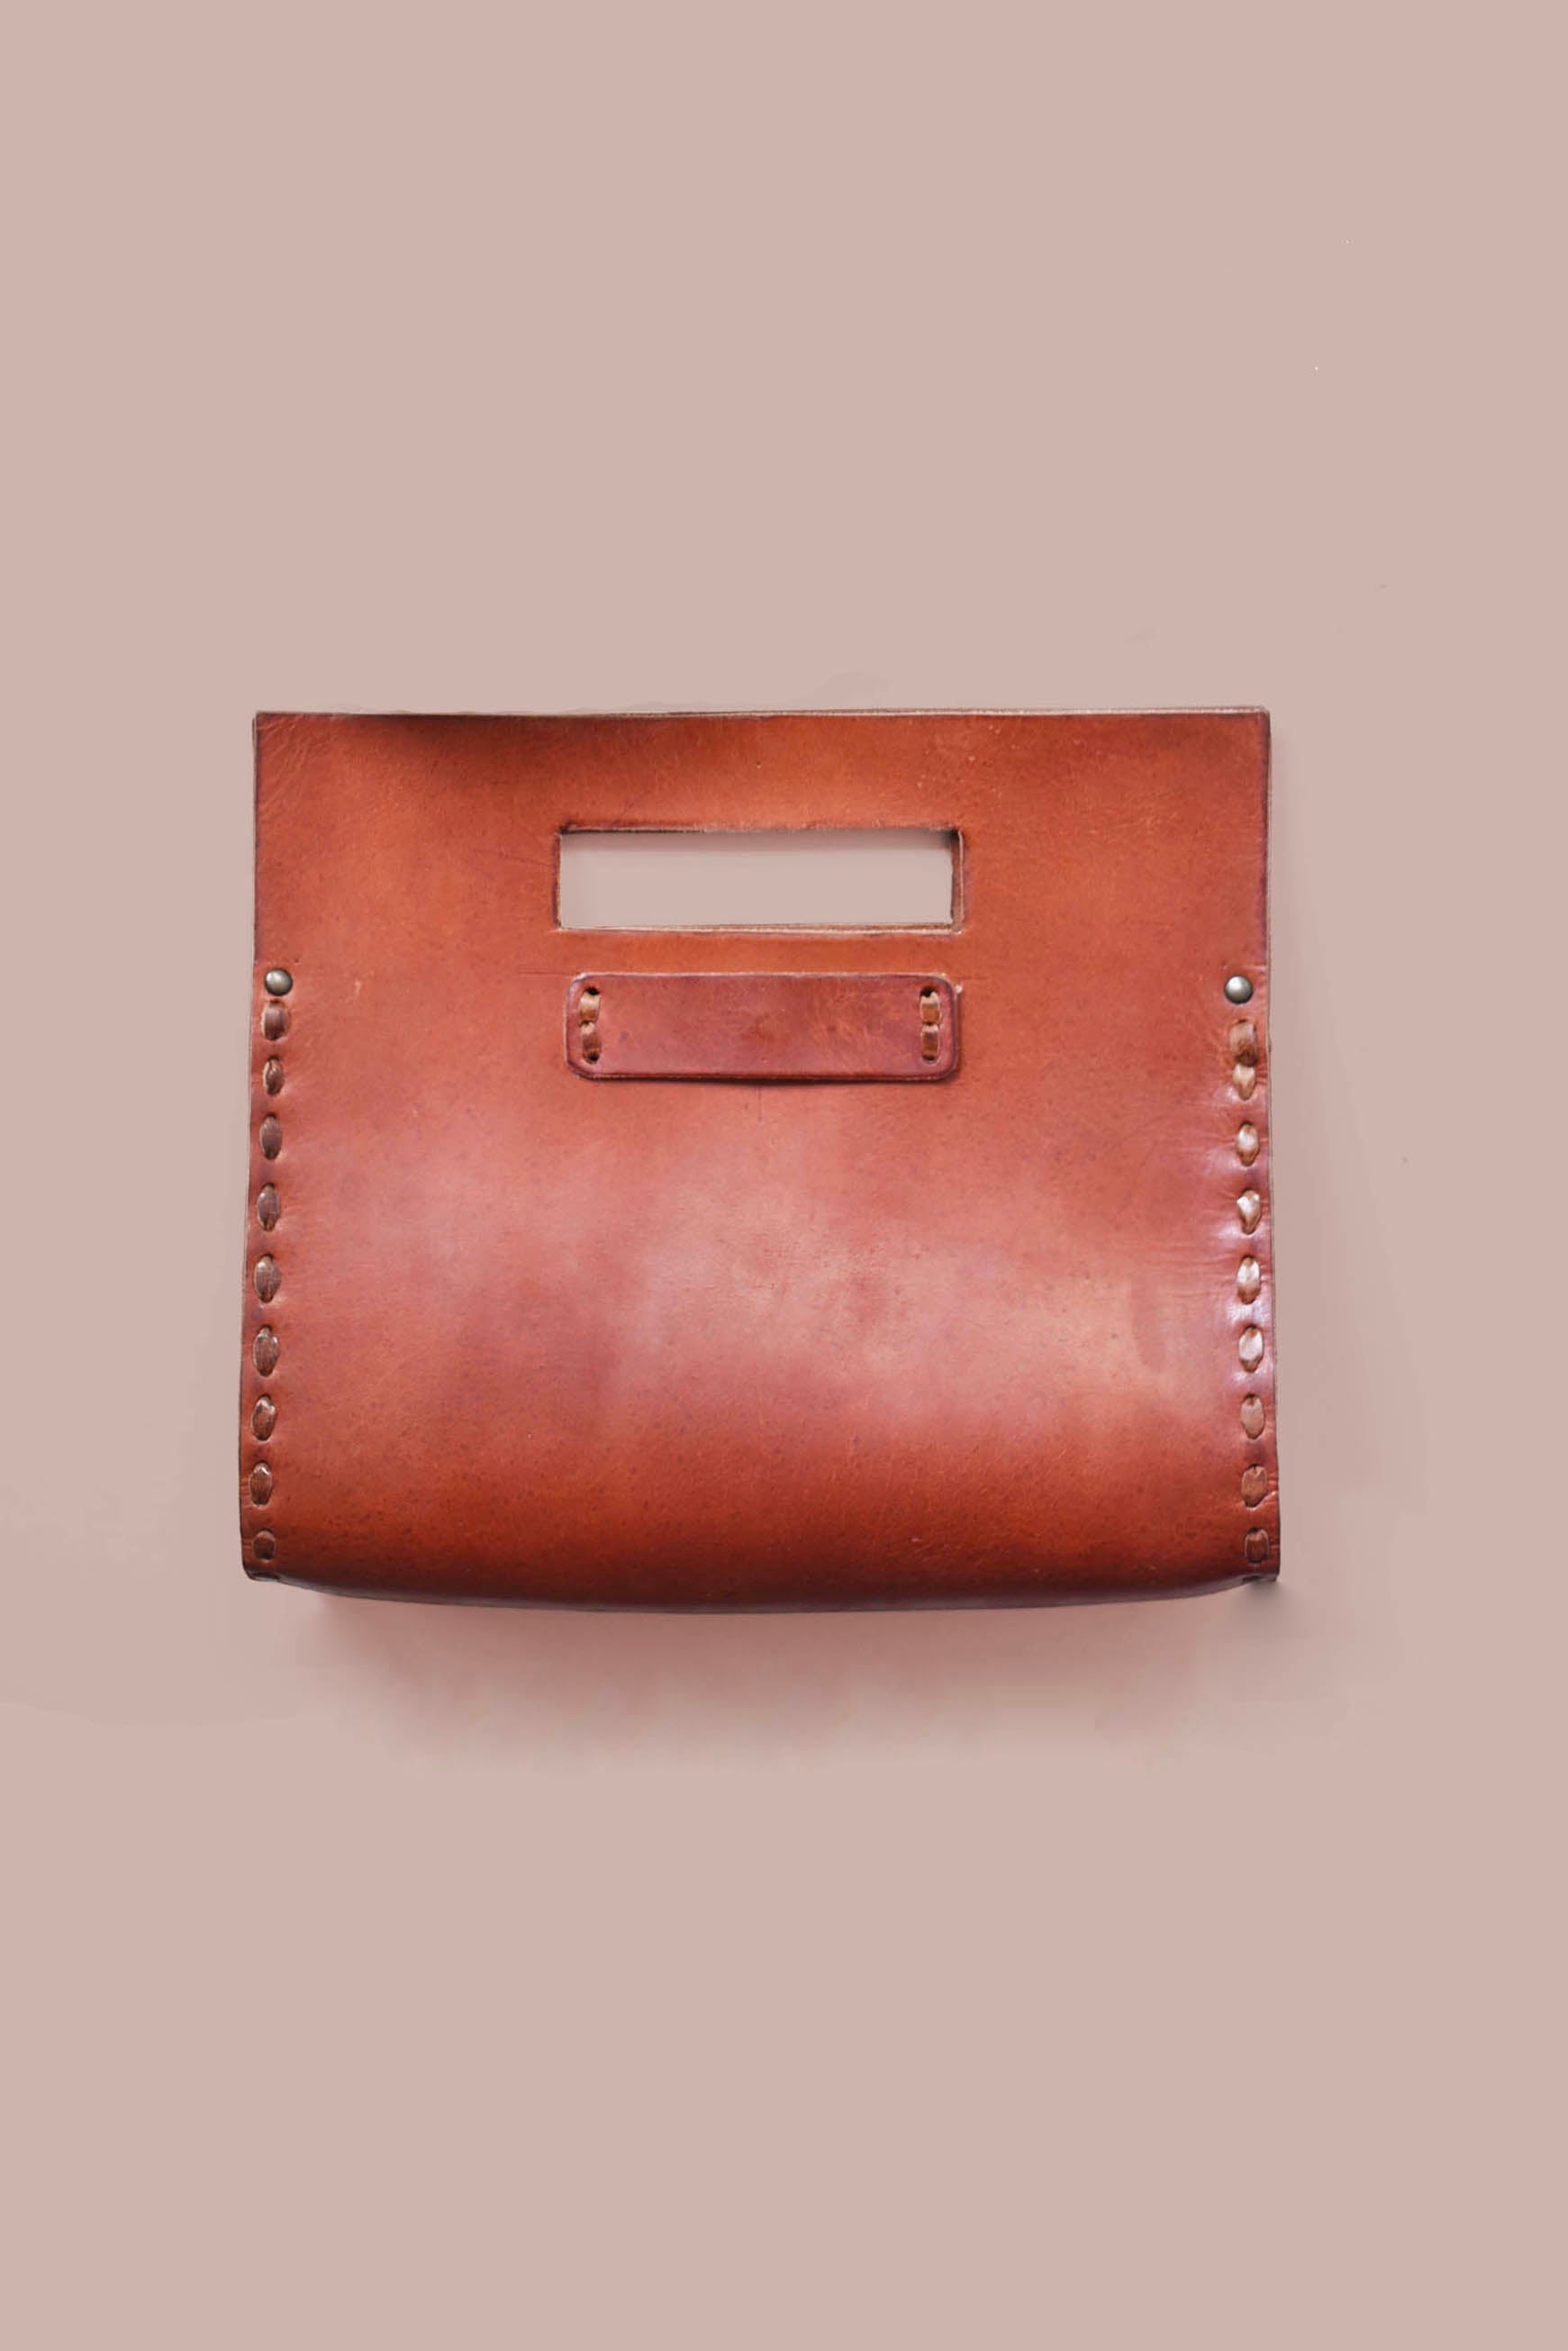 Classic Brown Leather Clutch from MExico